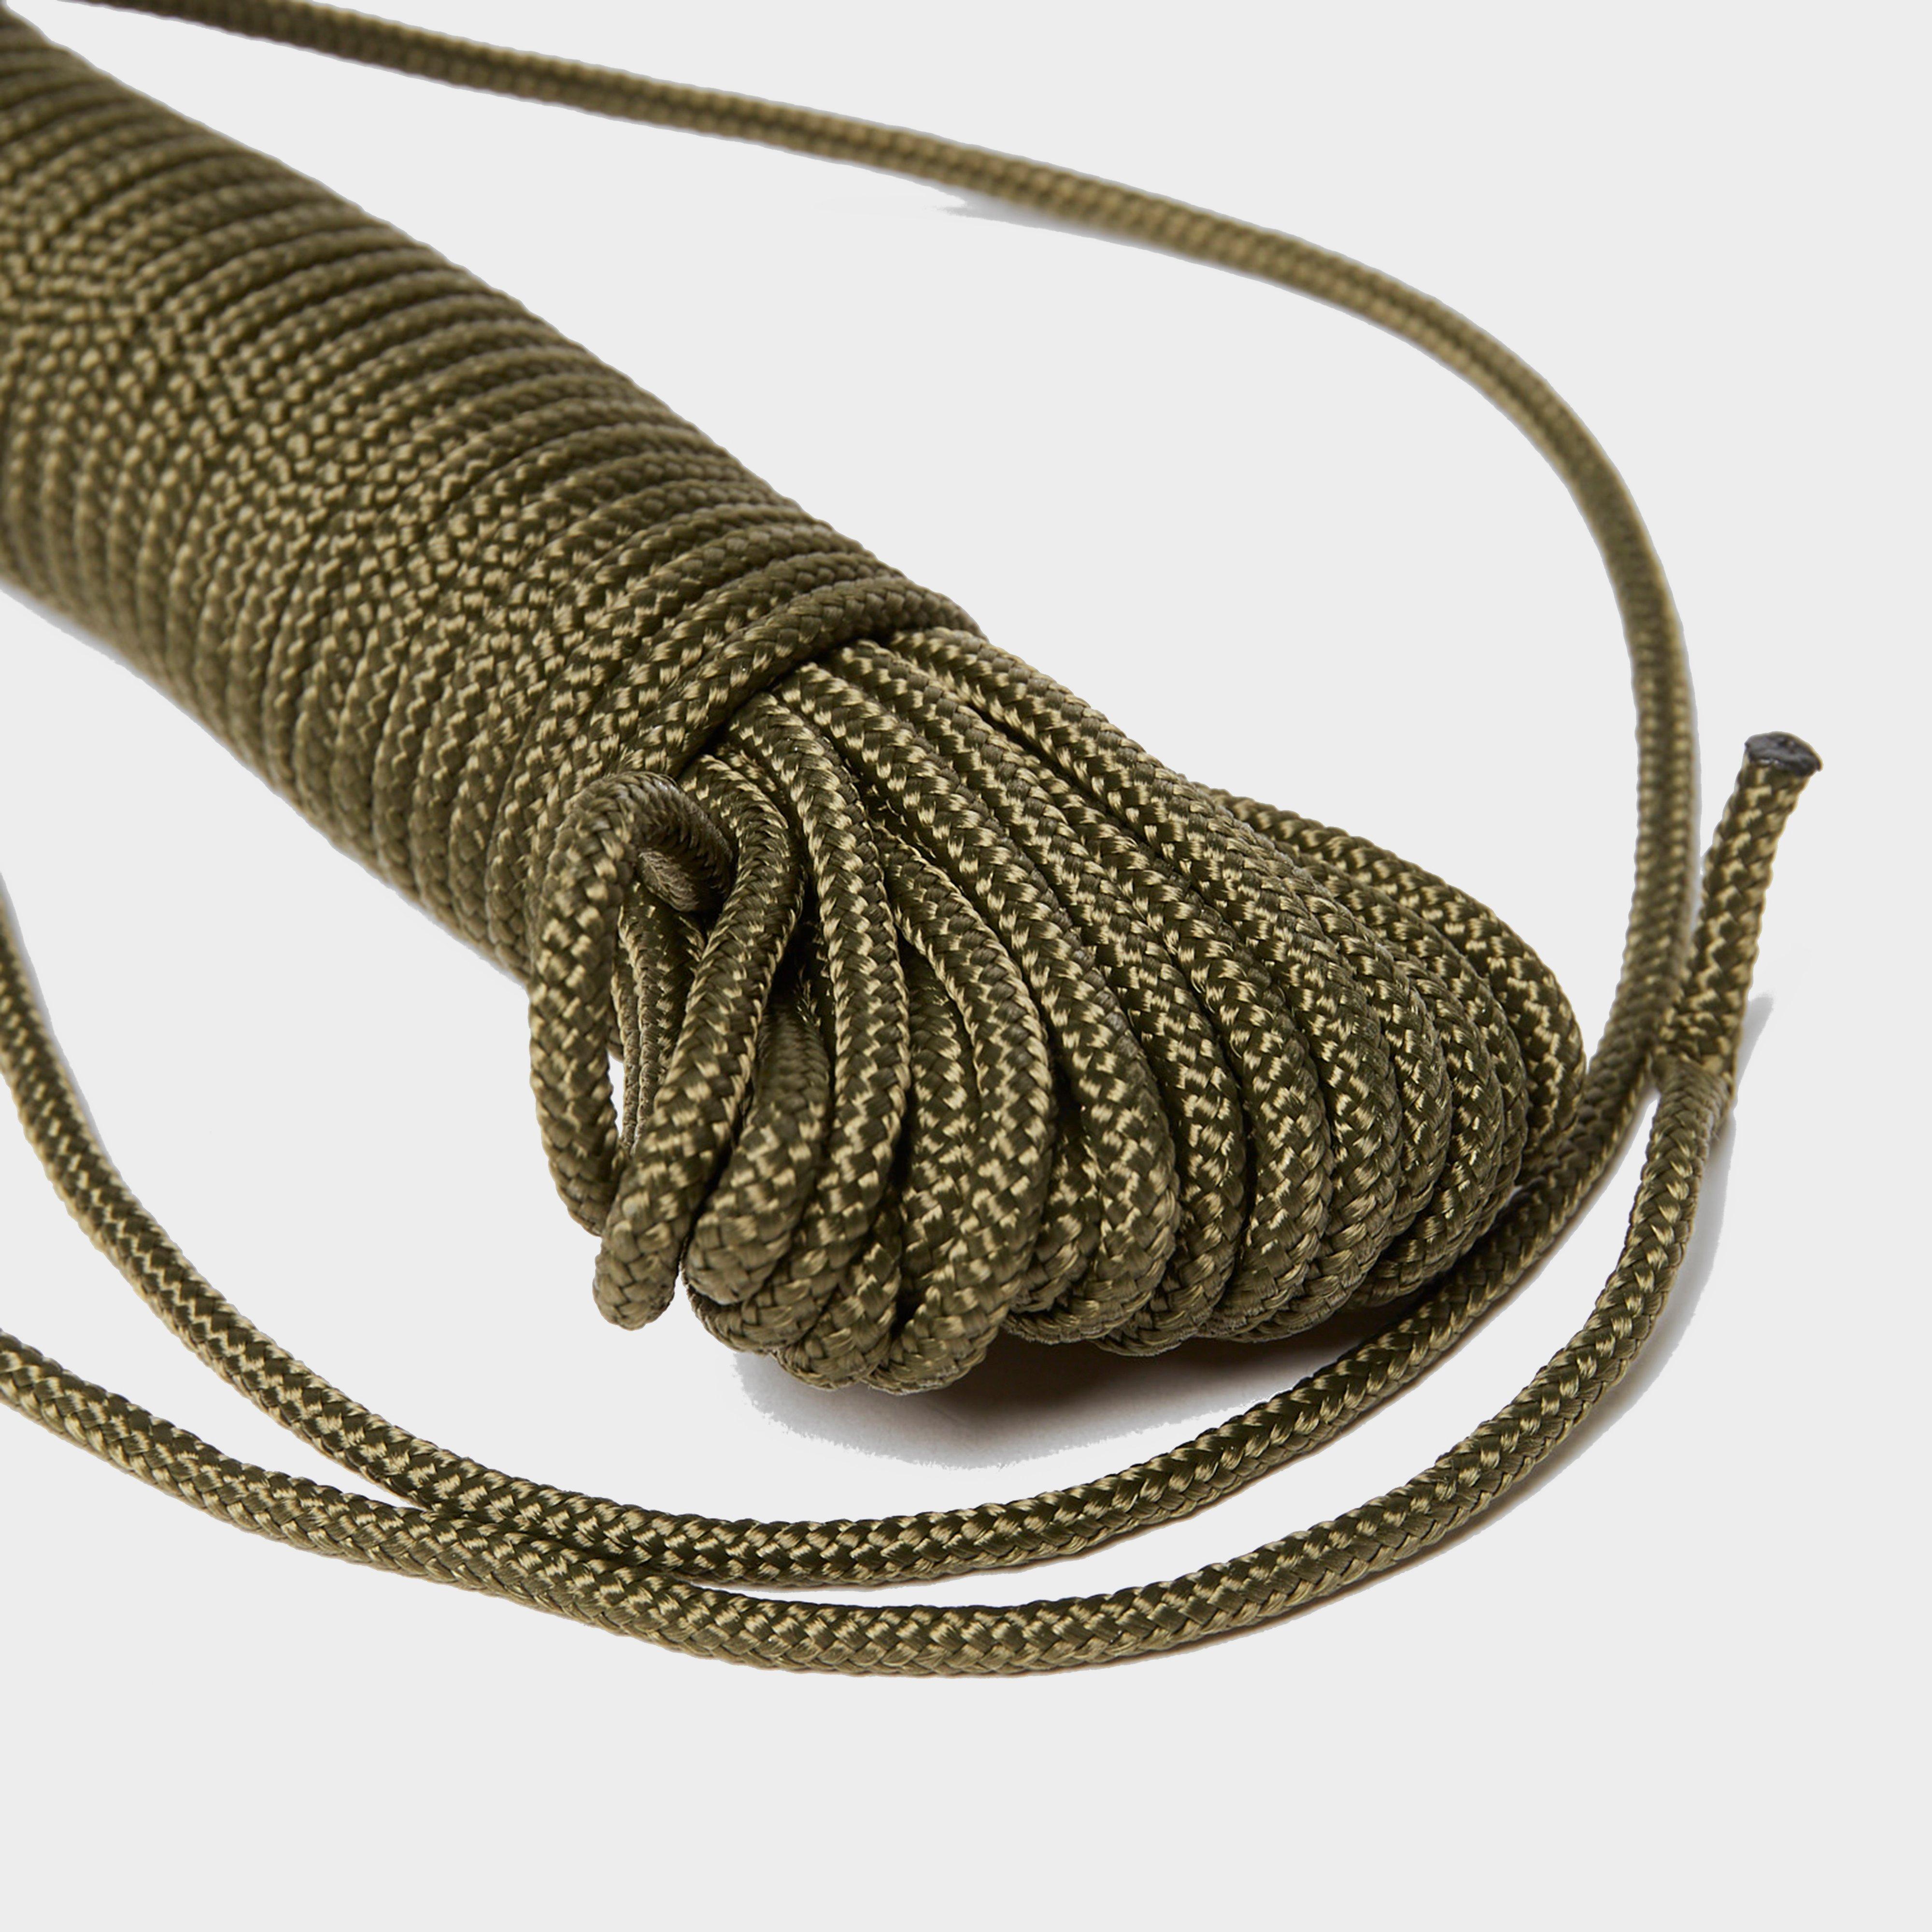 OEX 15 Metre Utility Cord Review